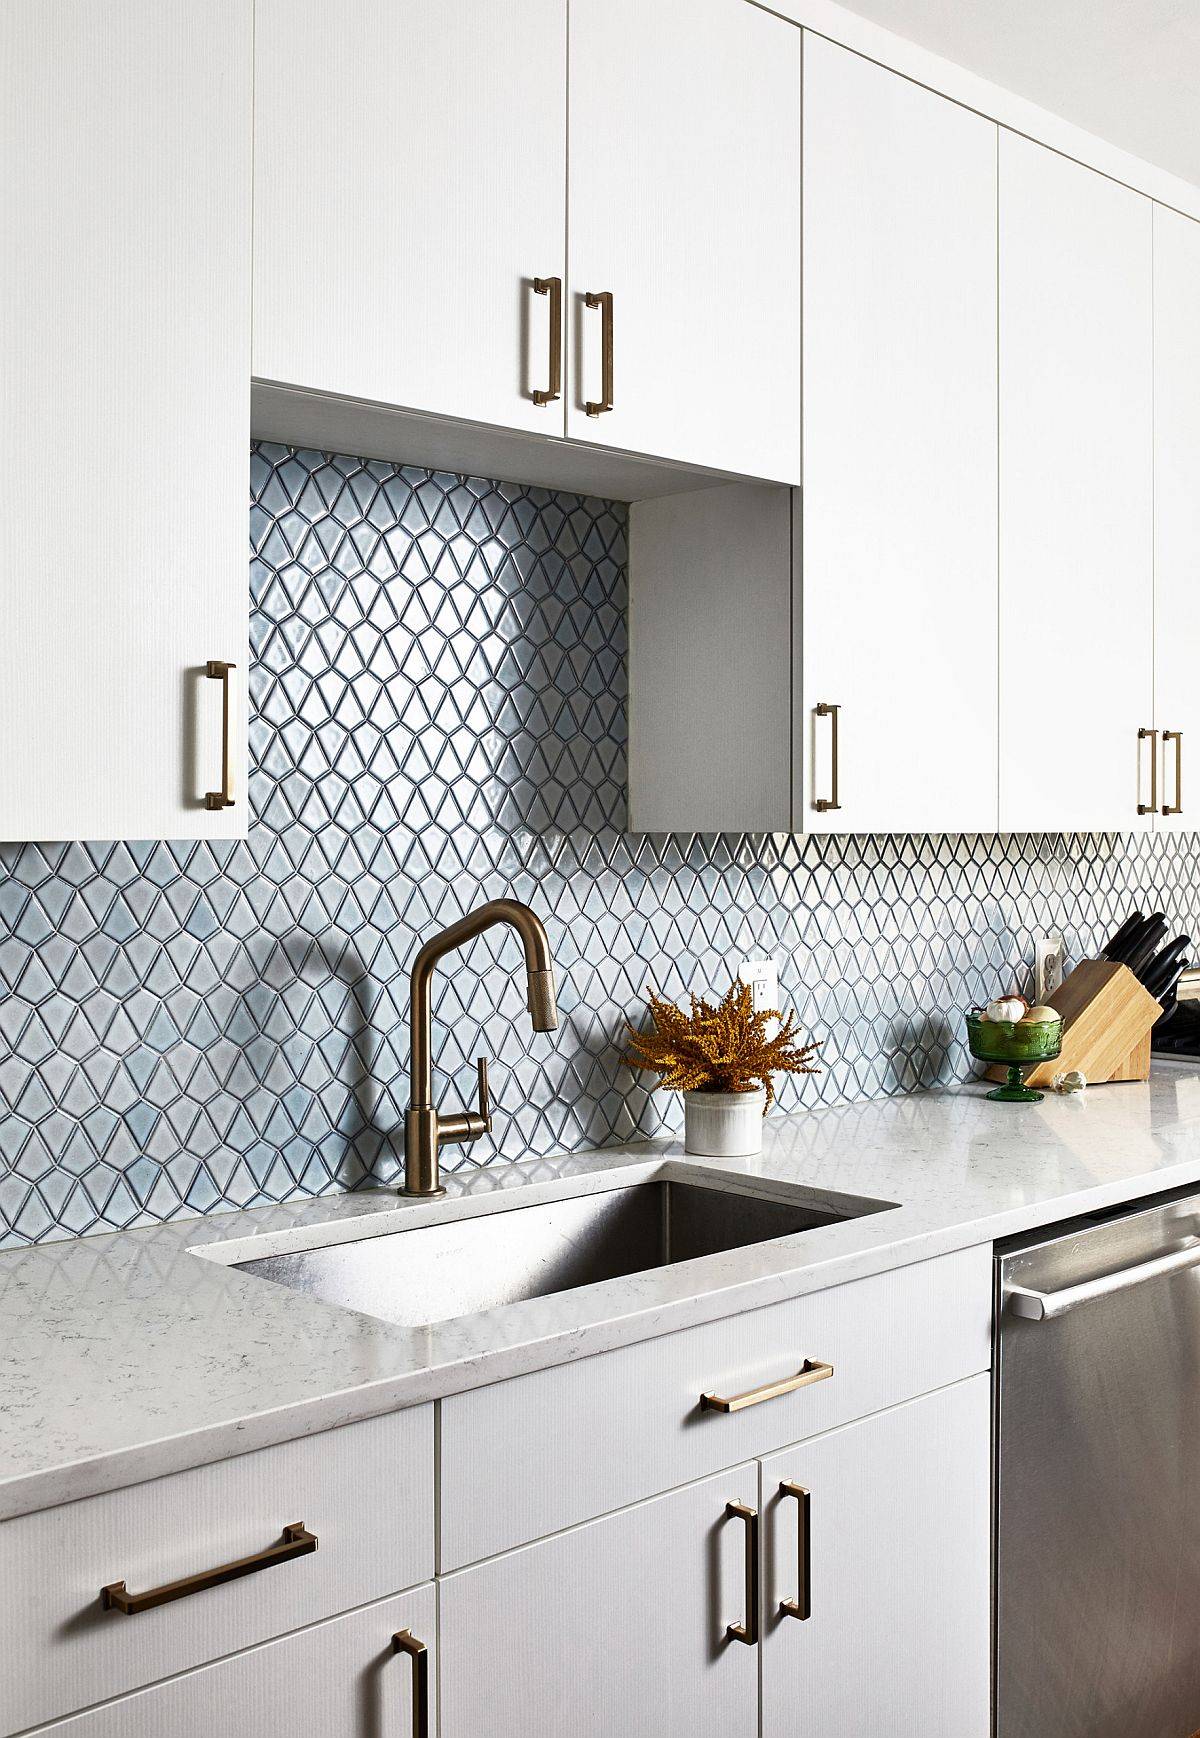 Kitchen-in-blue-and-white-with-stainless-steel-sink-and-quartz-countertops-42134